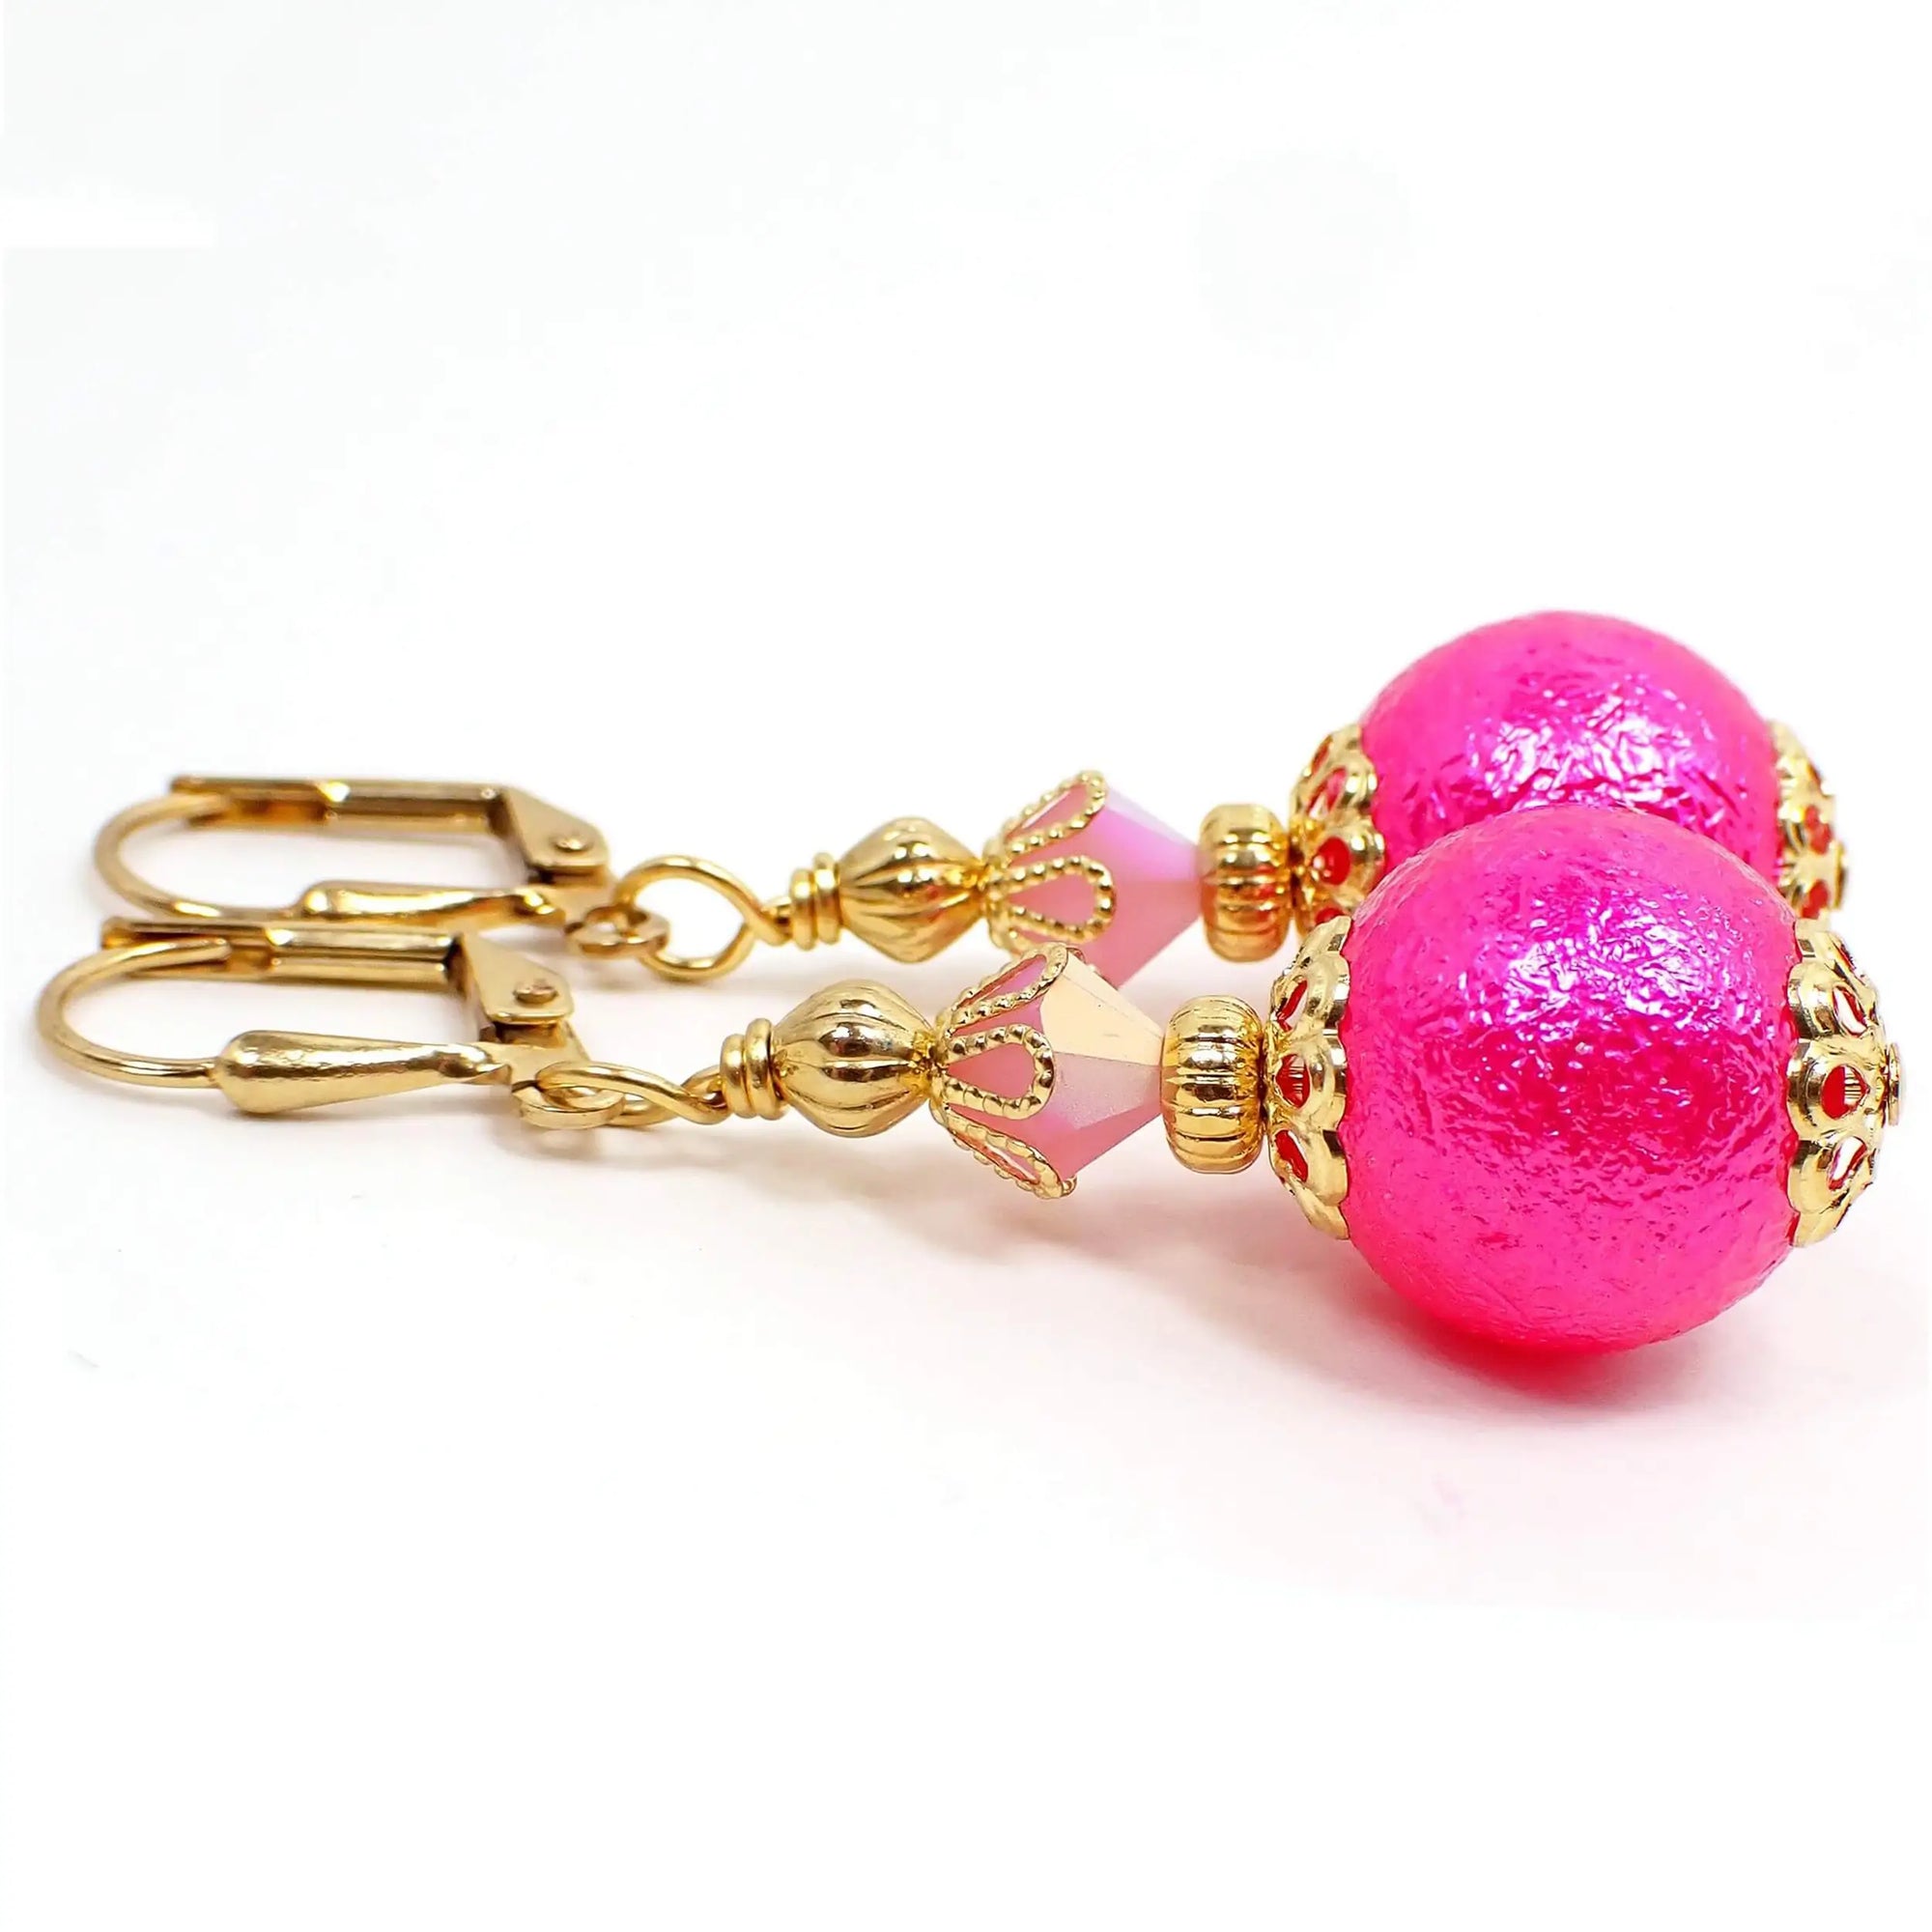 Side view of the handmade sphere drop earrings. The metal is gold plated in color. There is a light pink faceted glass crystal at the top. The bottom acrylic bead is round with a bumpy texture and is bright hot pink in color.